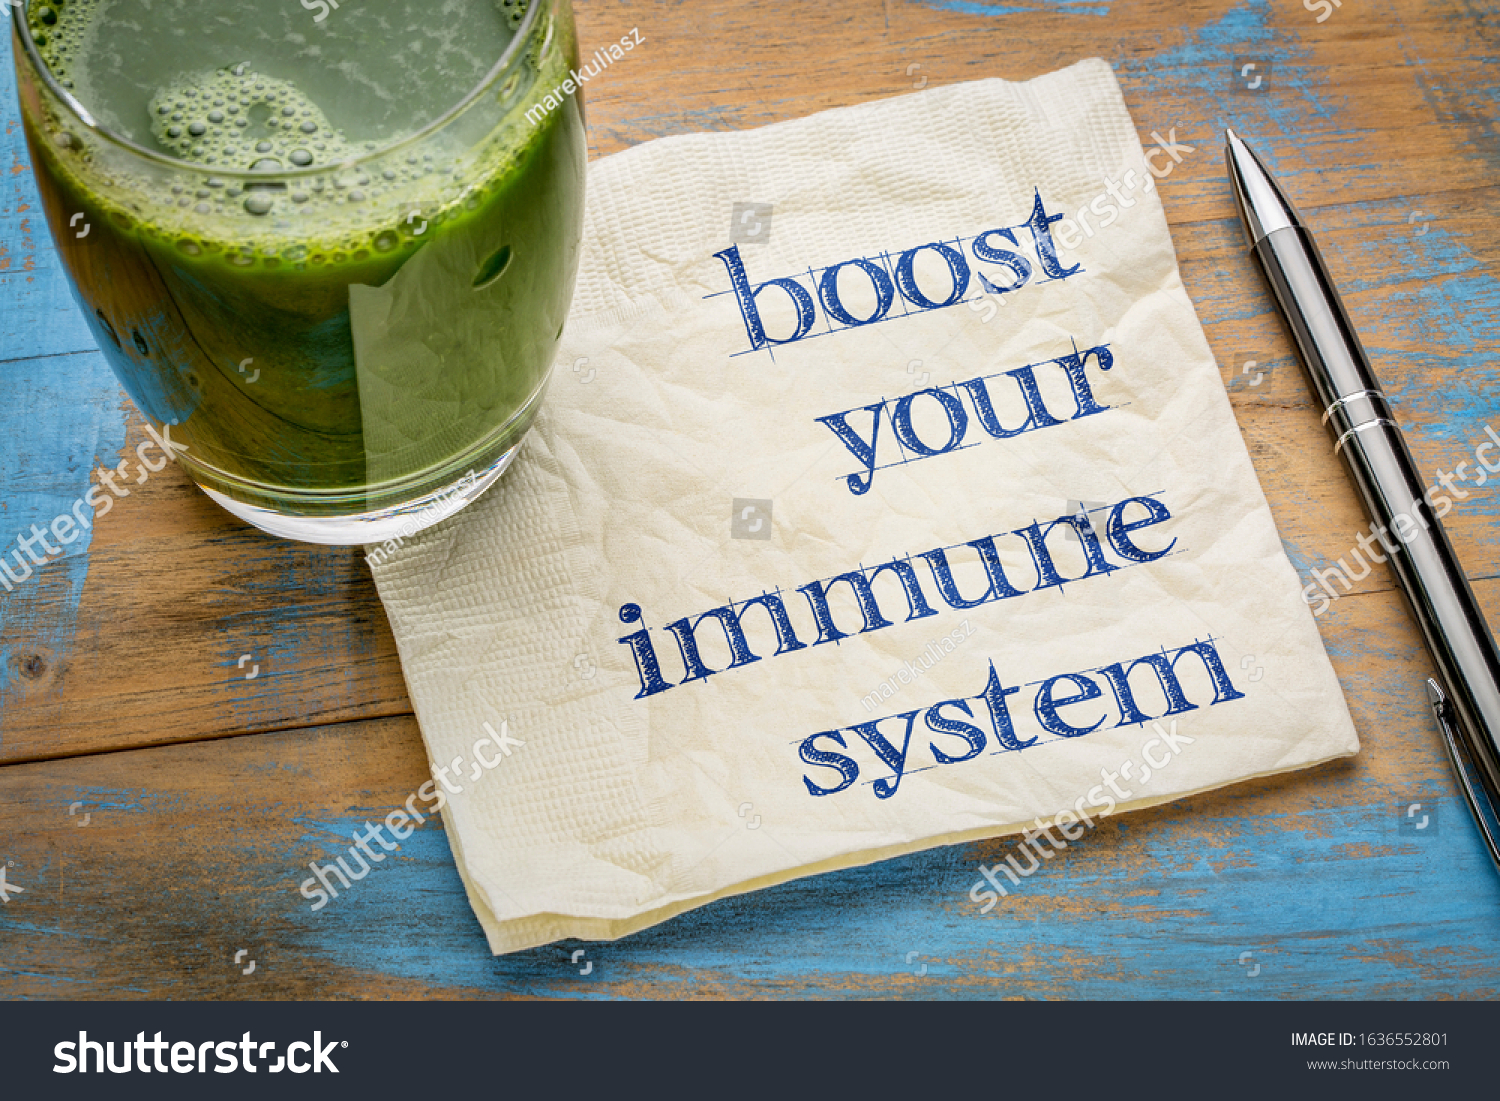 boost your immune system - inspirational handwriting on a napkin with a glass of fresh, green, vegetable juice, healthy lifestyle and wellbeing concept #1636552801